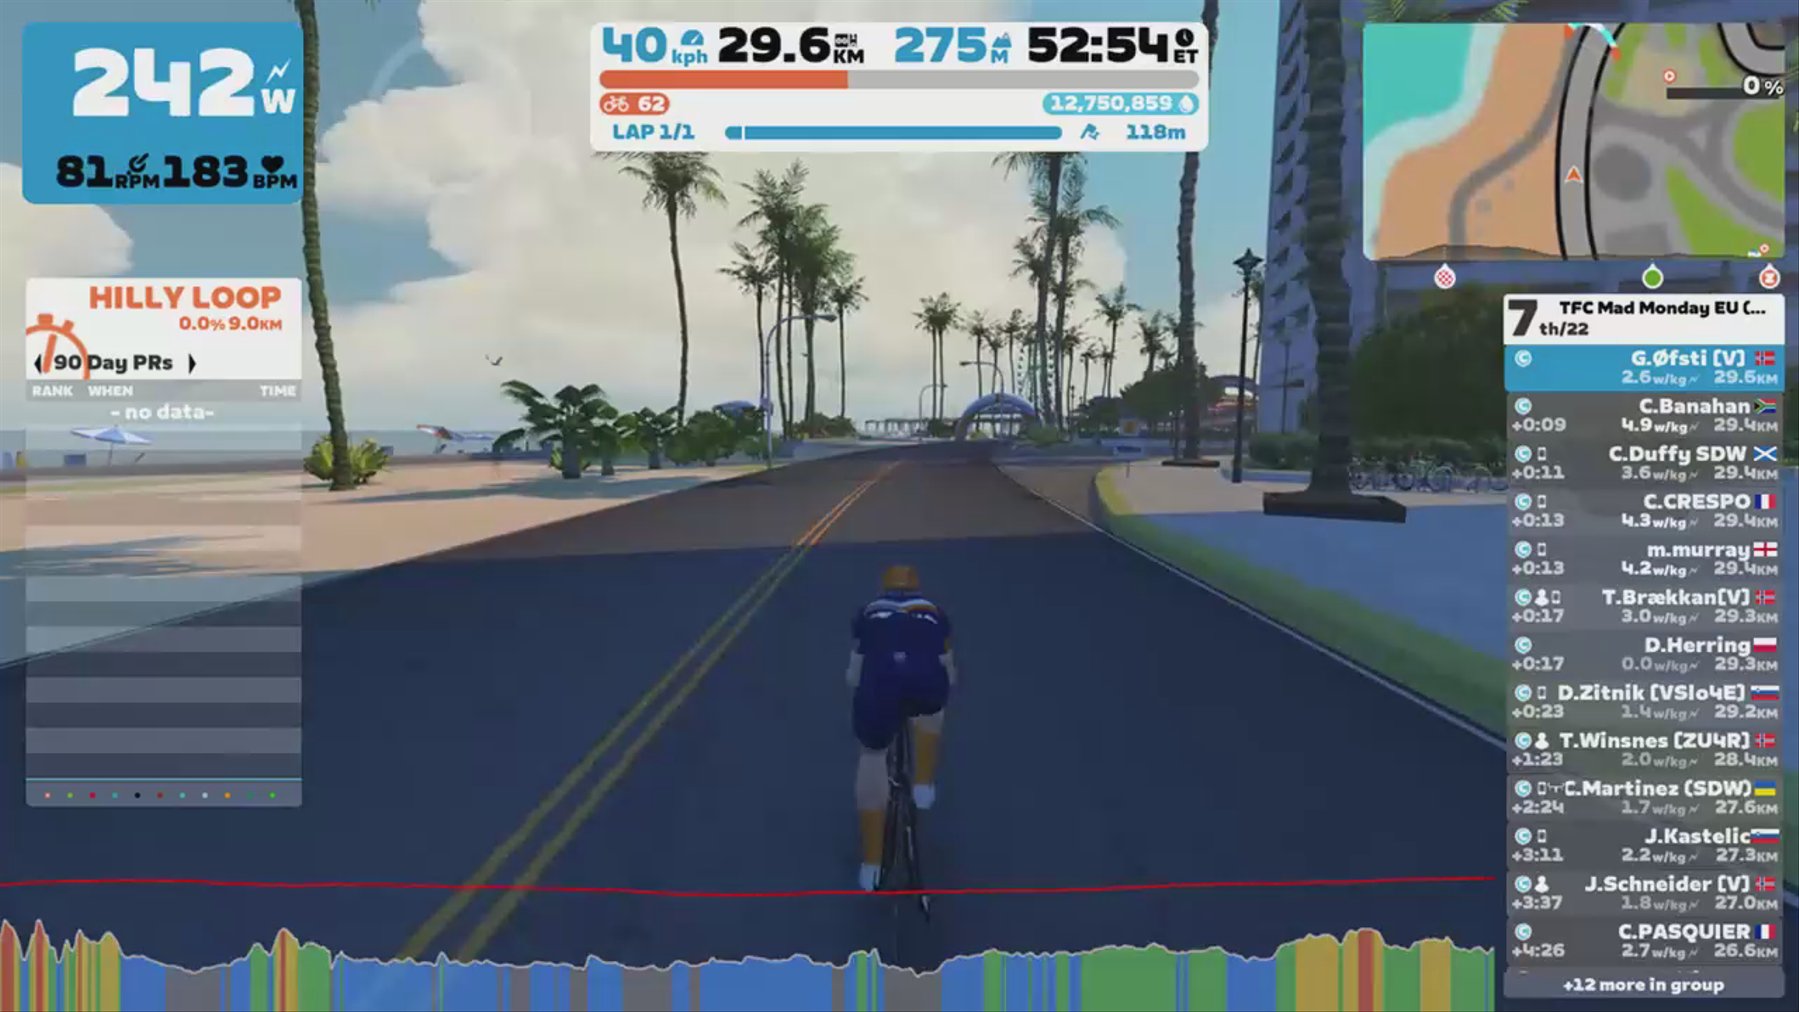 Zwift - Race: TFC Mad Monday EU (Middle-End) (C) on Road to Ruins in Watopia